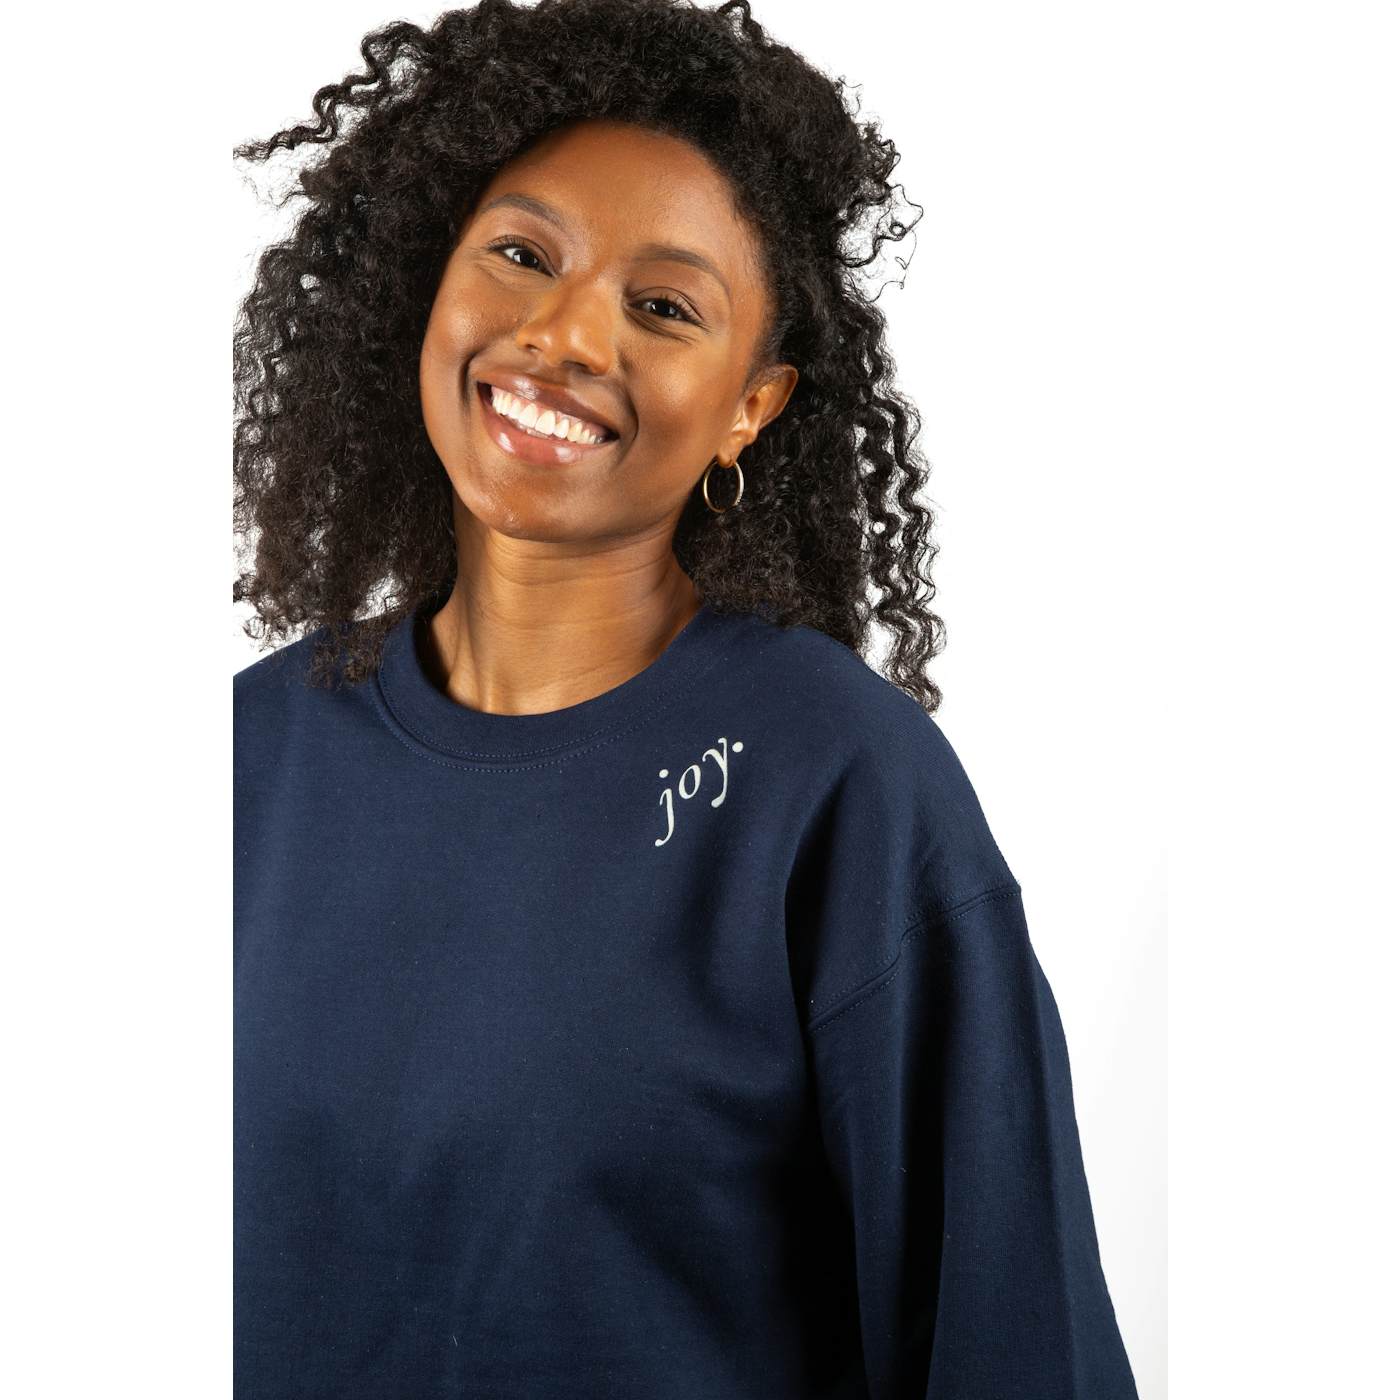 for KING & COUNTRY Joy Crewneck